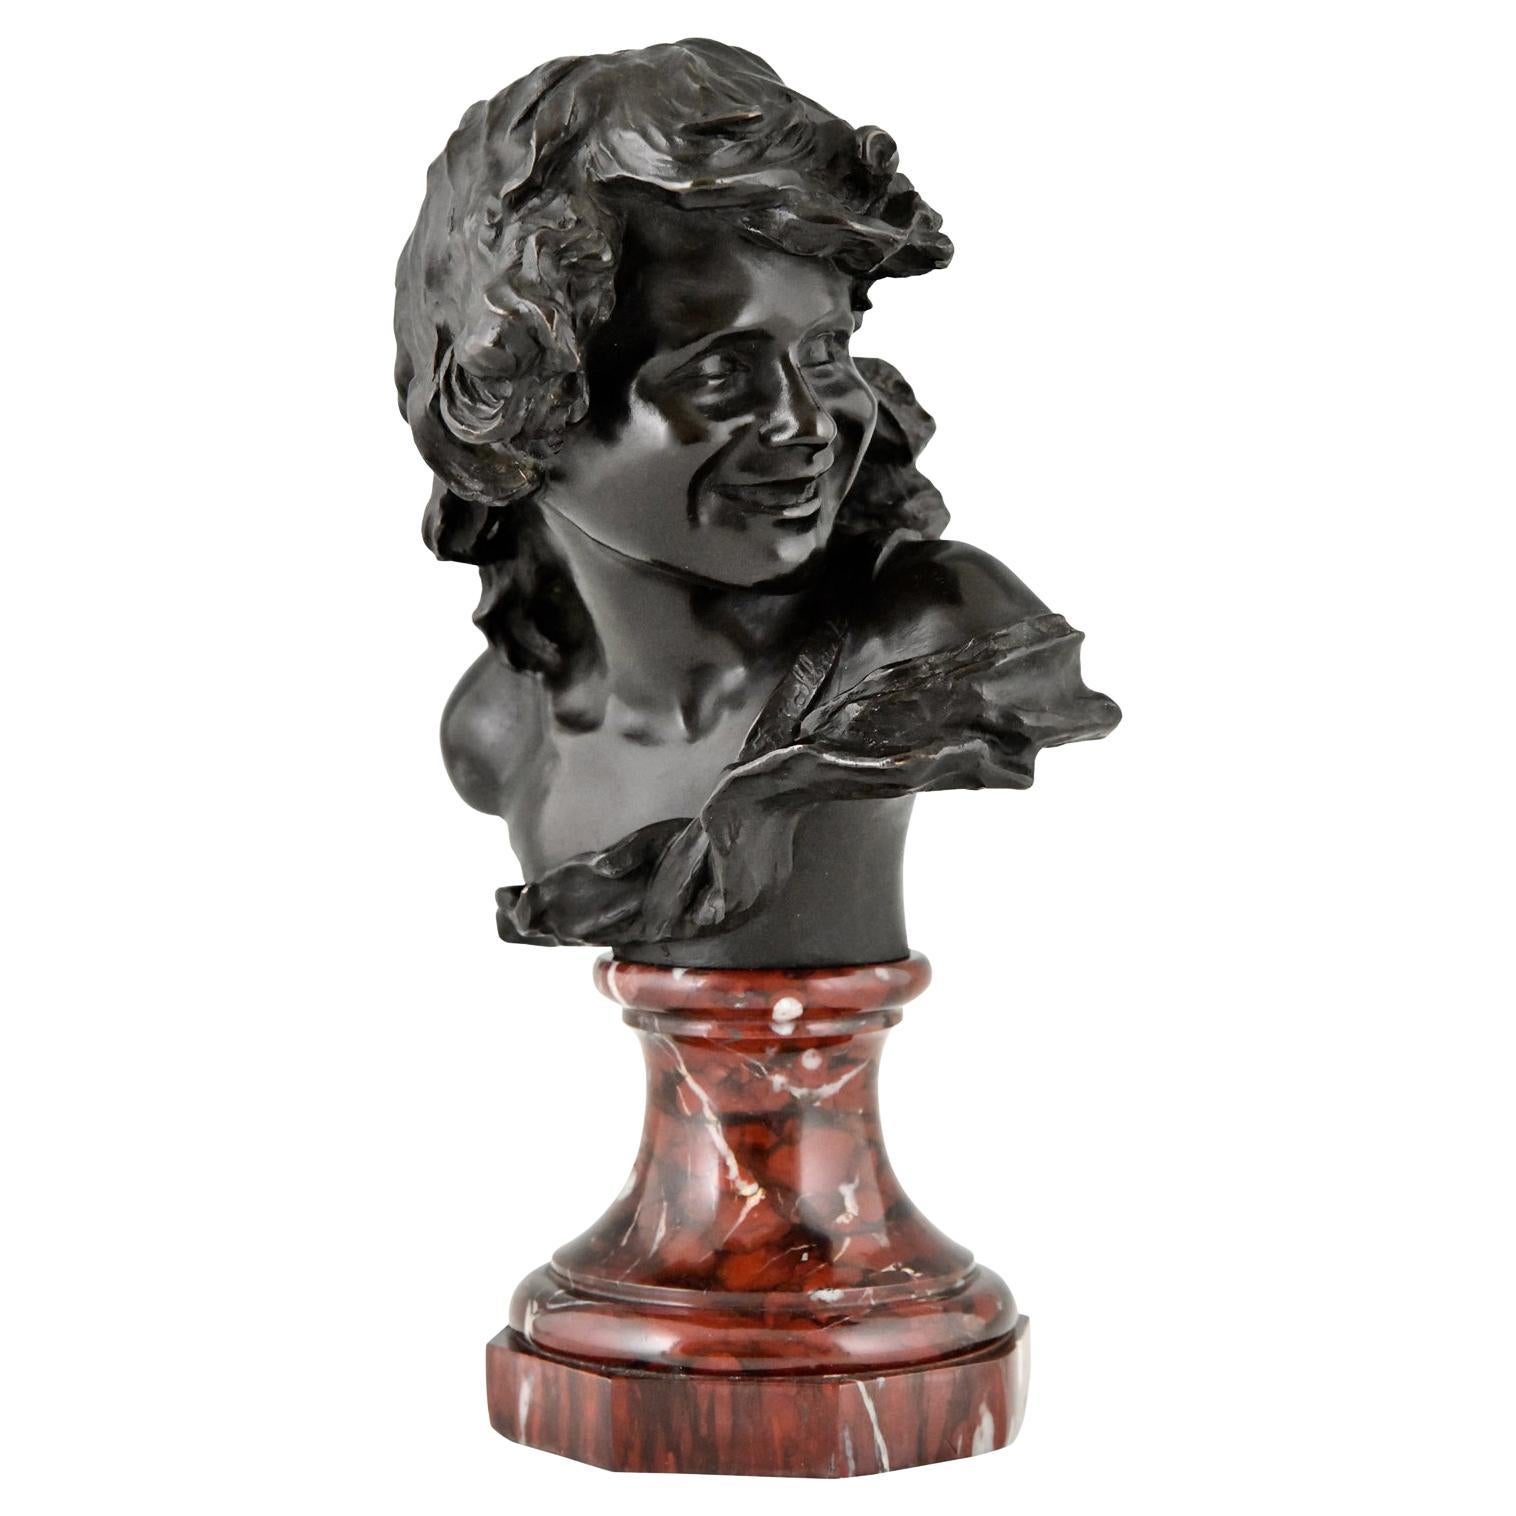 Antique Bronze Bust of a Smiling Child by Injalbert Foundry Mark Siot France 190 For Sale